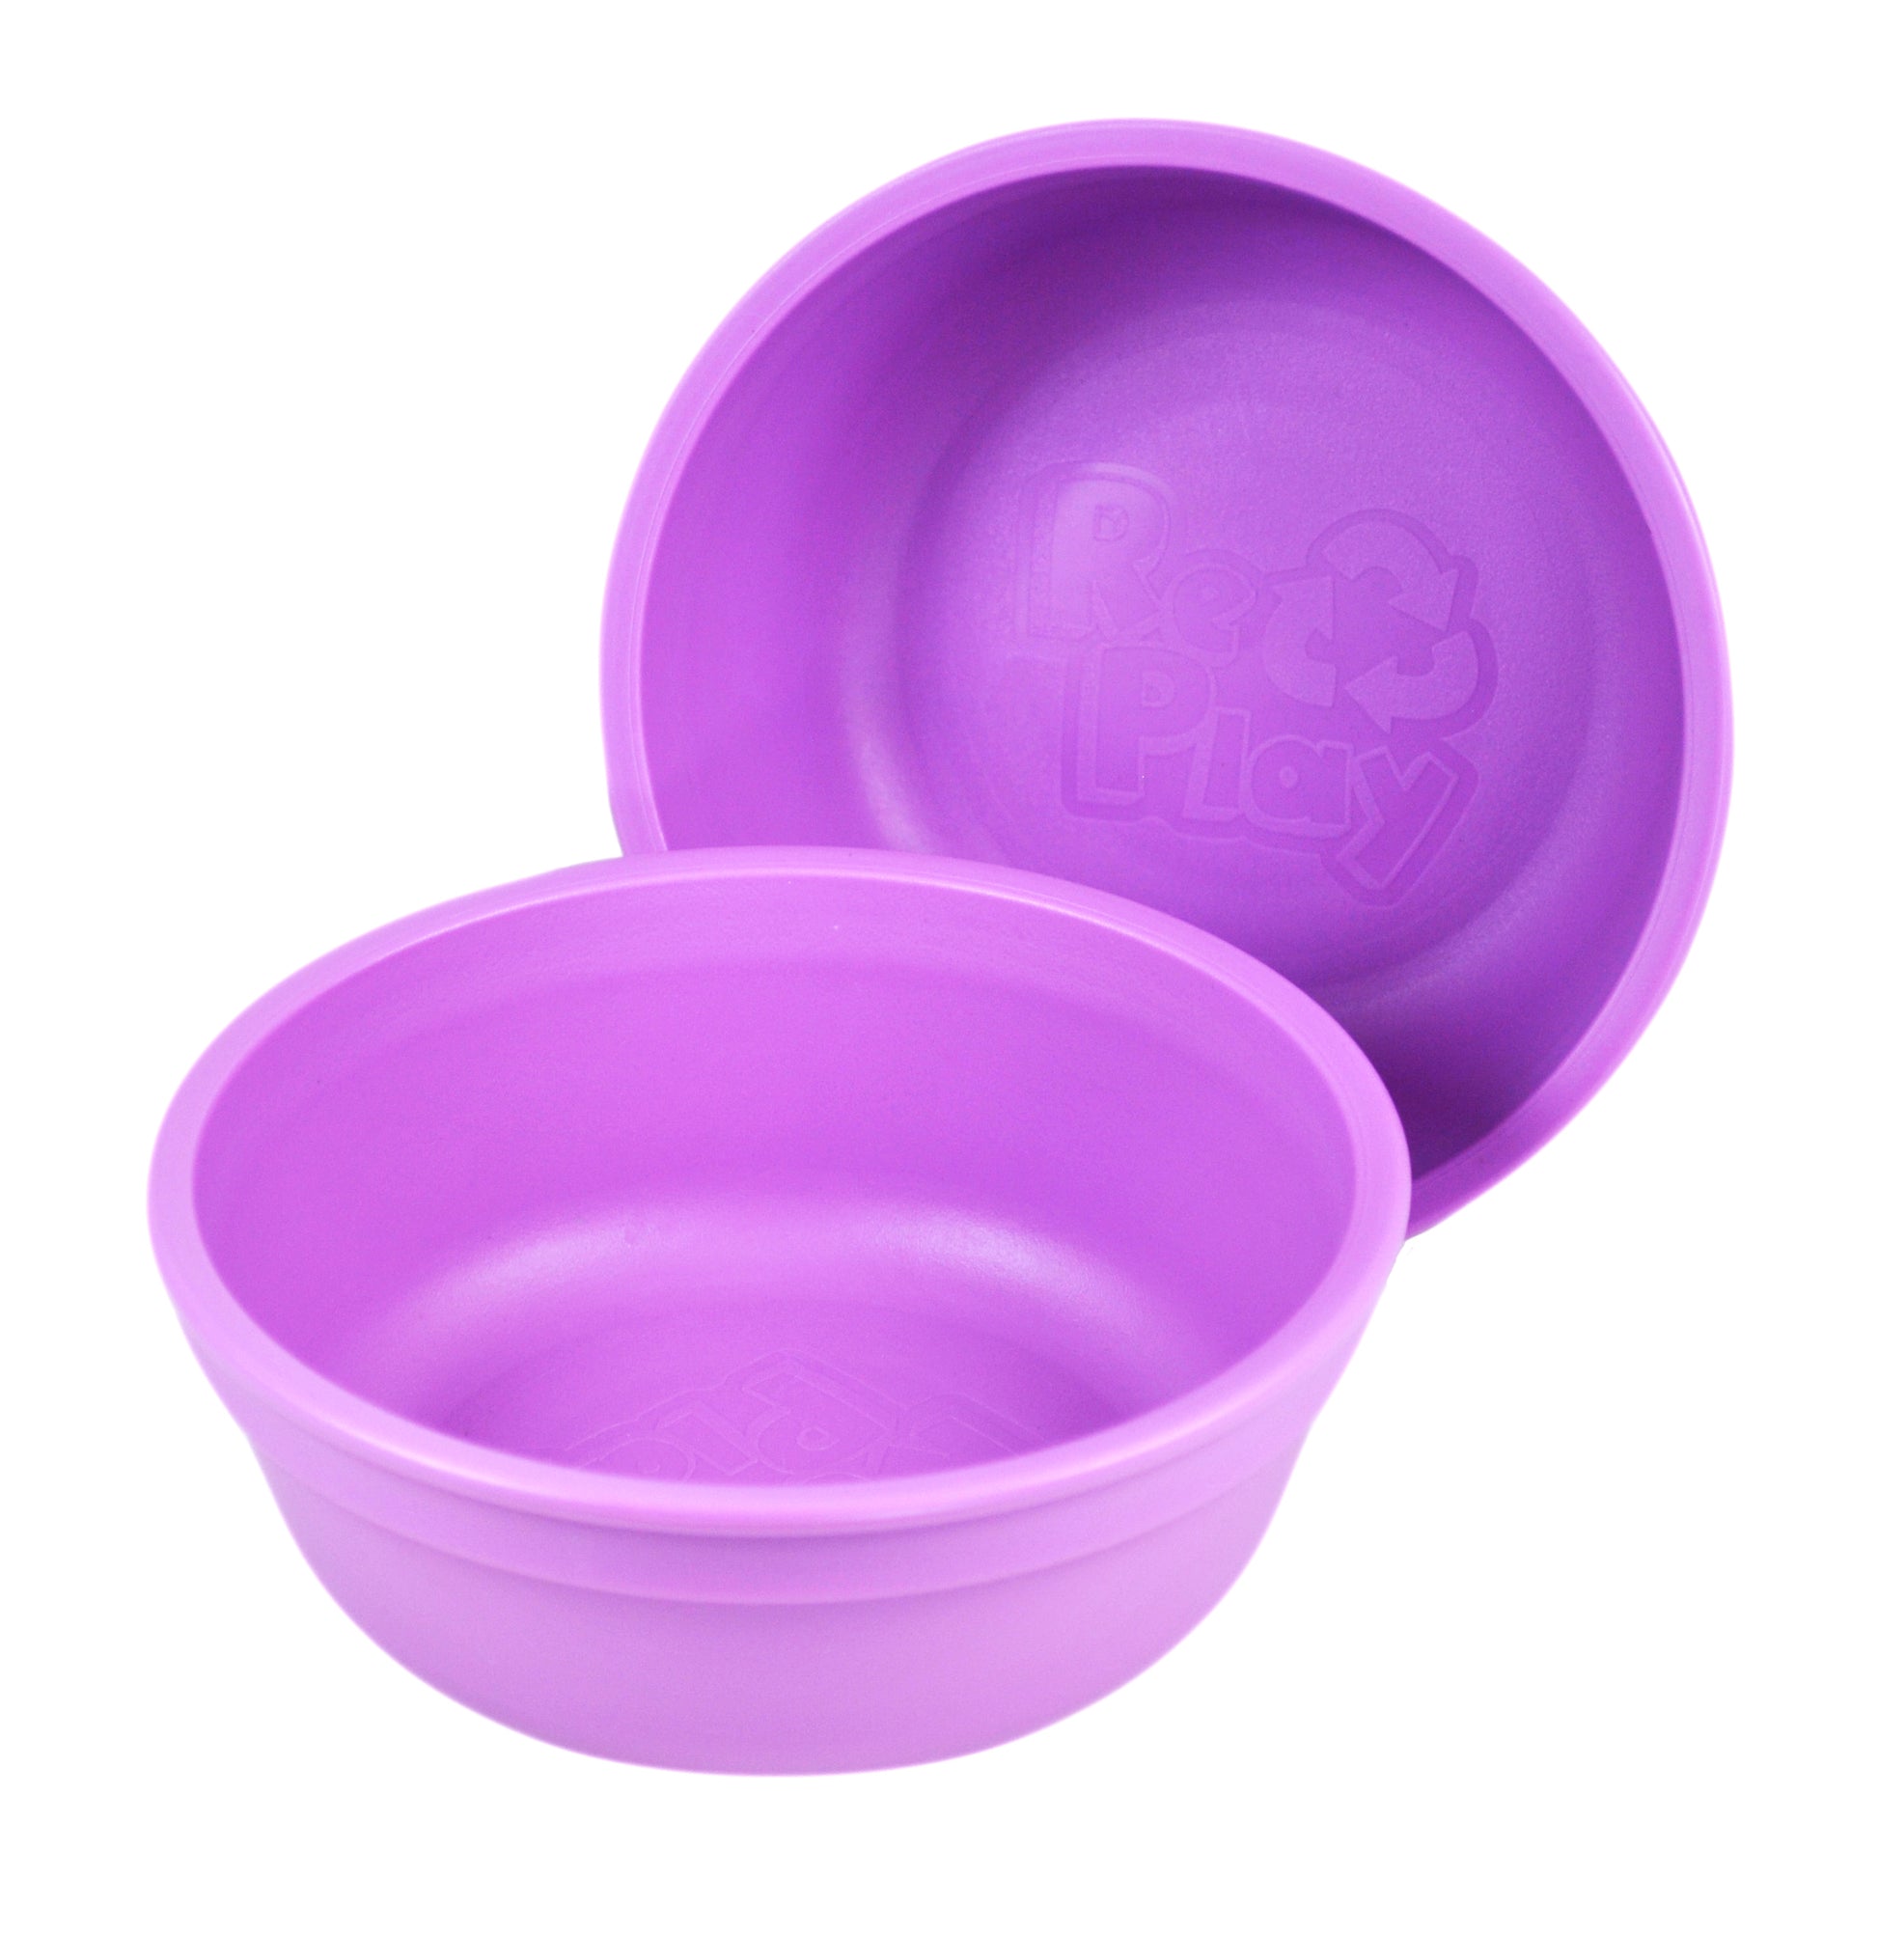 Re-Play Bowl | Standard Size in Purple from Bear & Moo